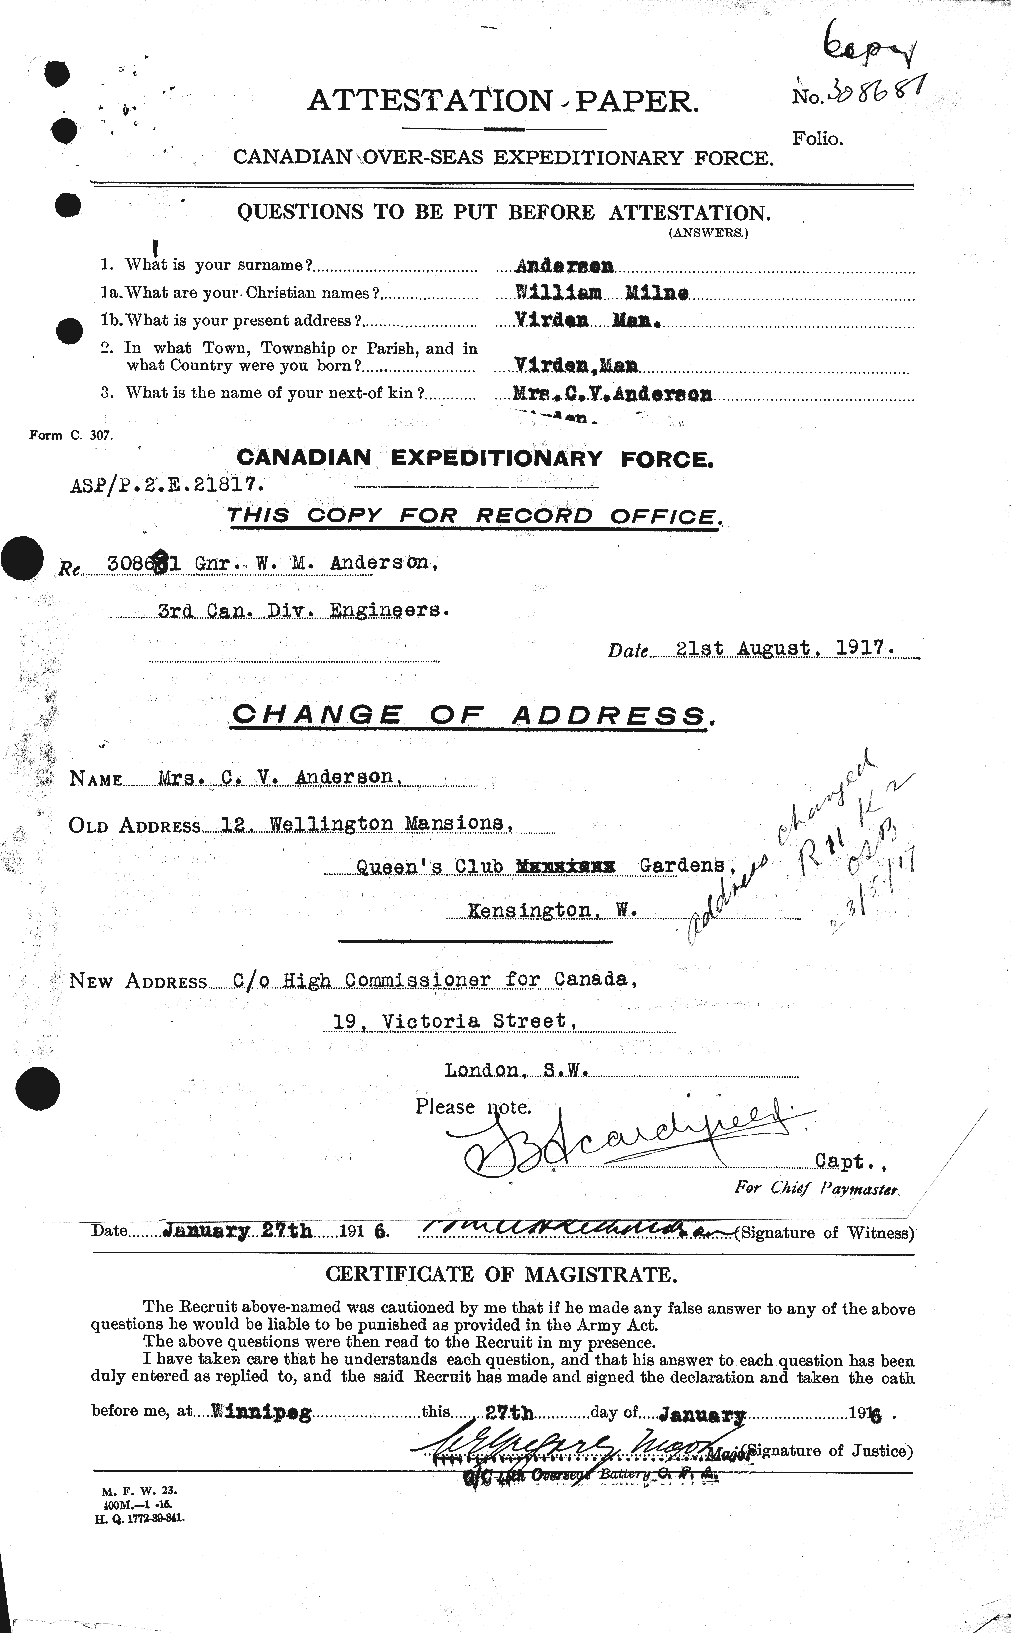 Personnel Records of the First World War - CEF 210682a